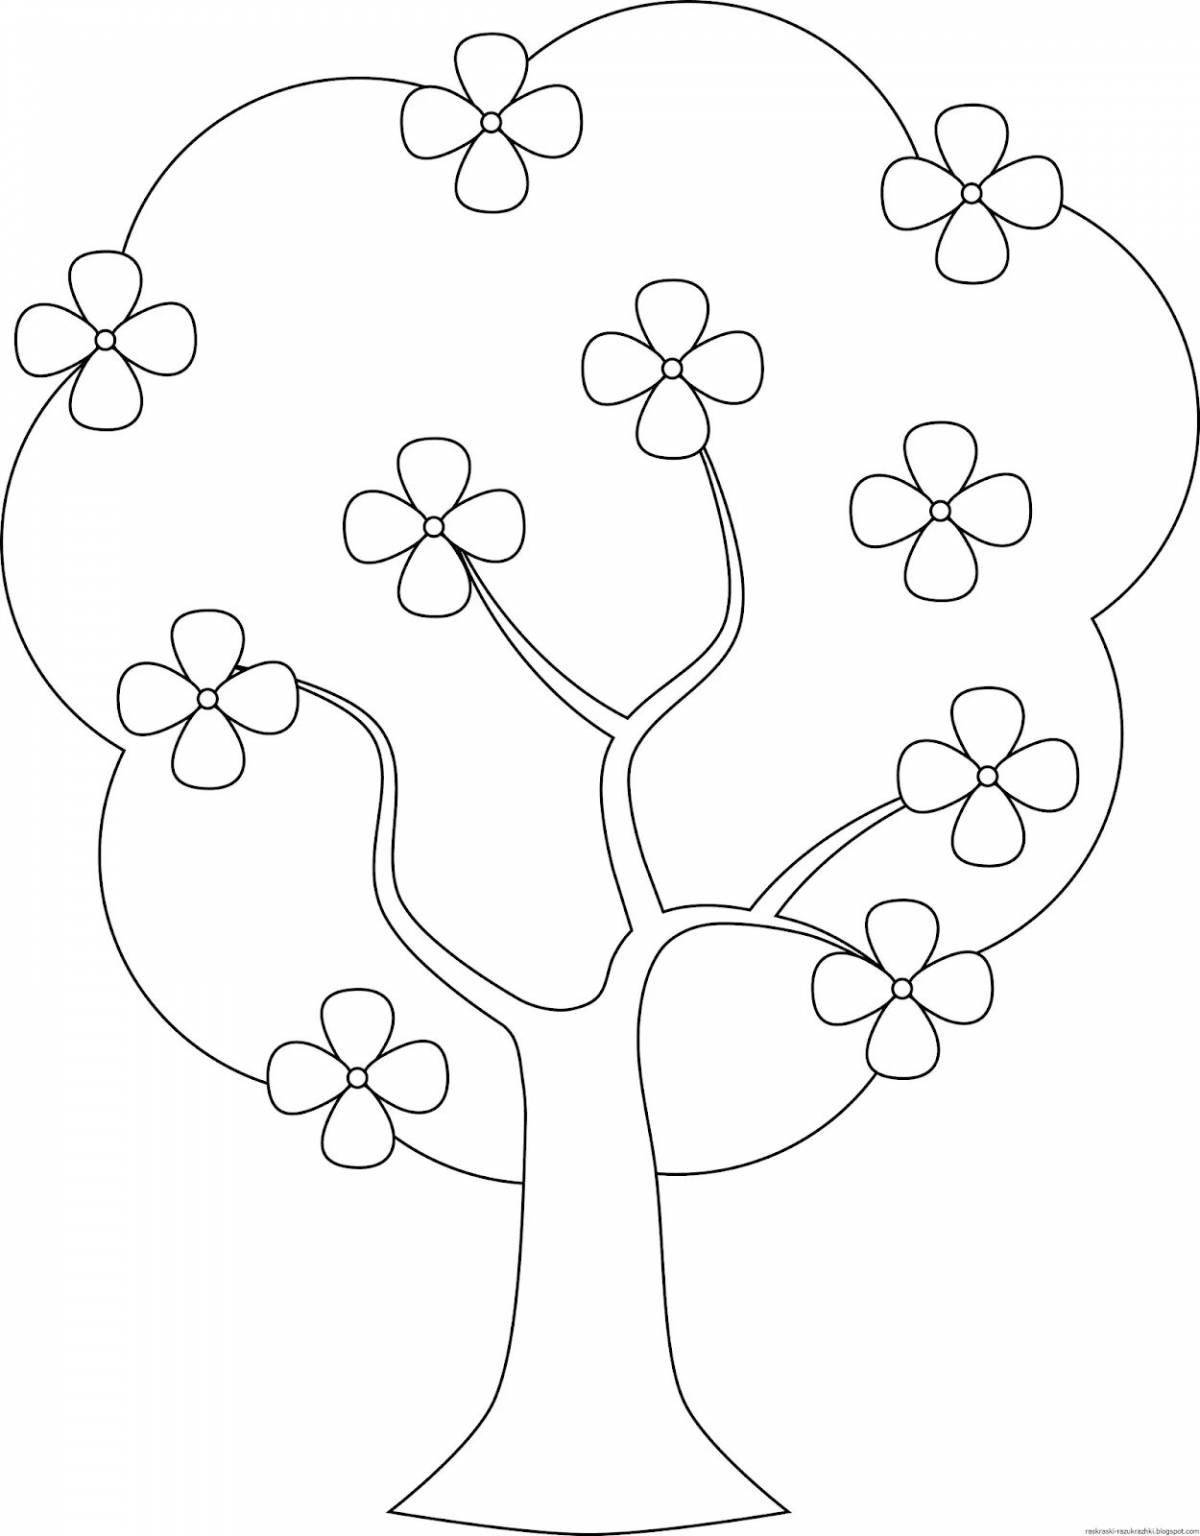 Nice tree coloring for kids